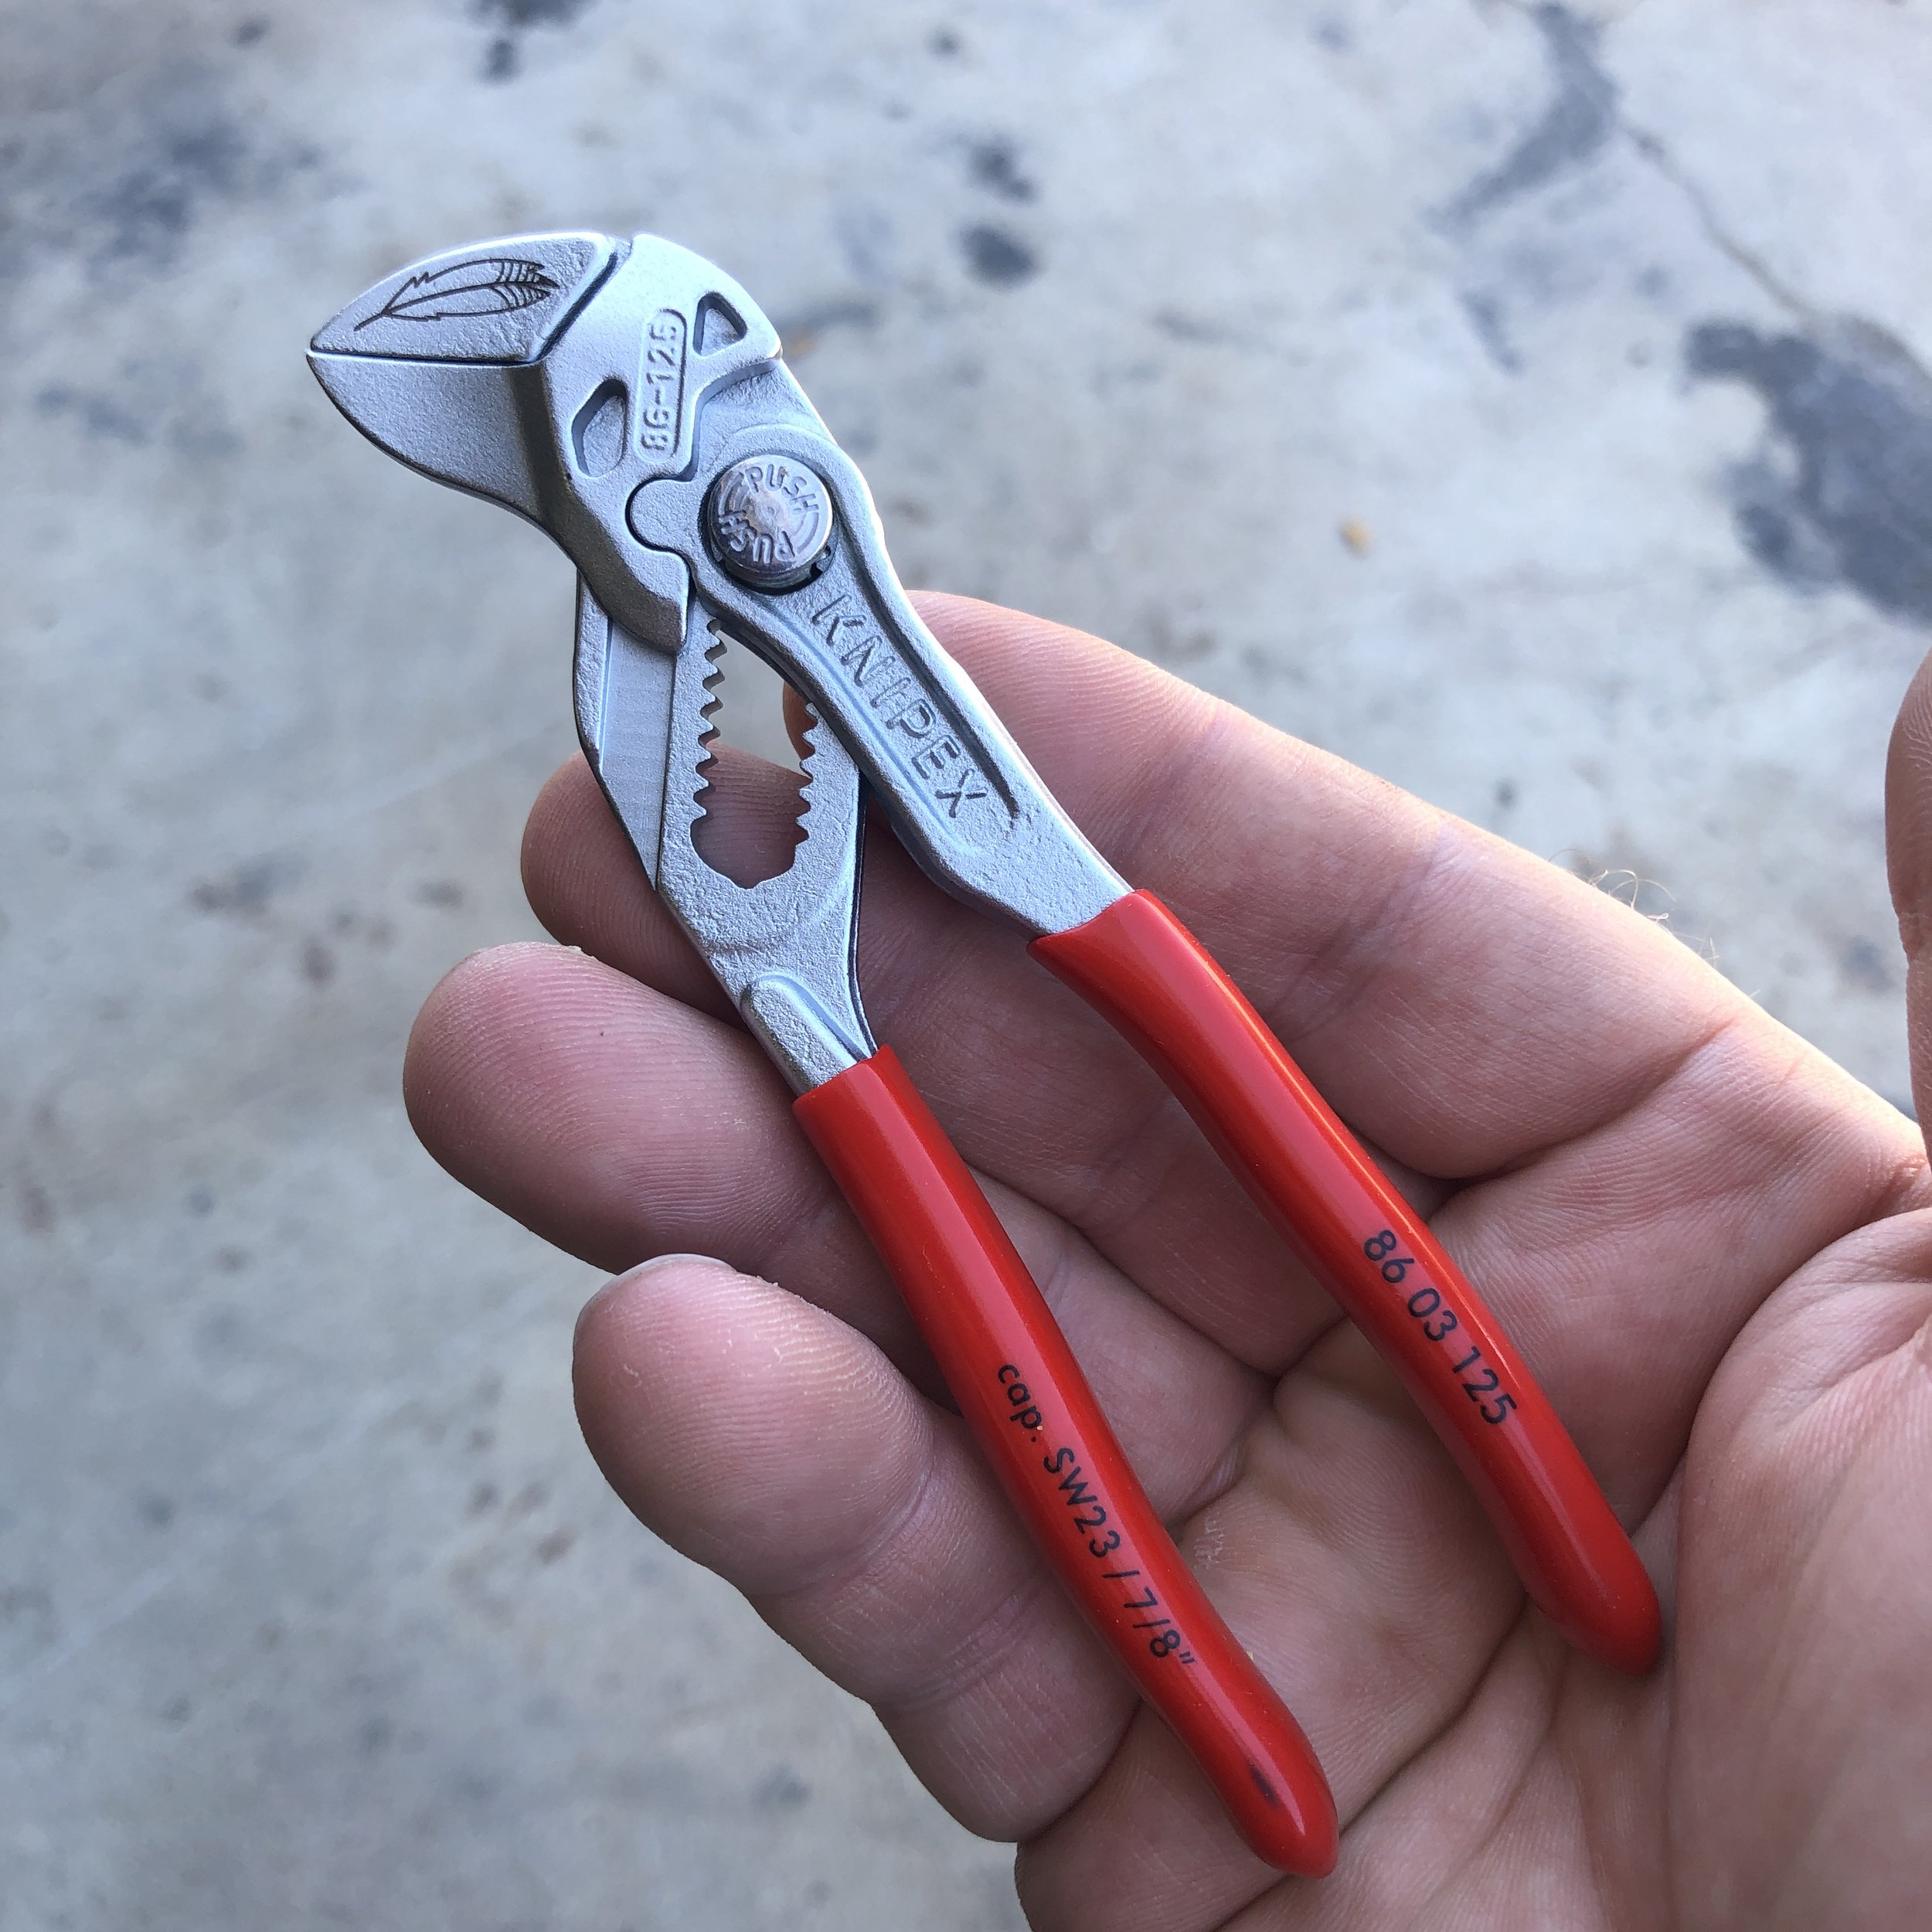 Knipex 86-03-125 5 Pliers Wrench - Plastic Grip